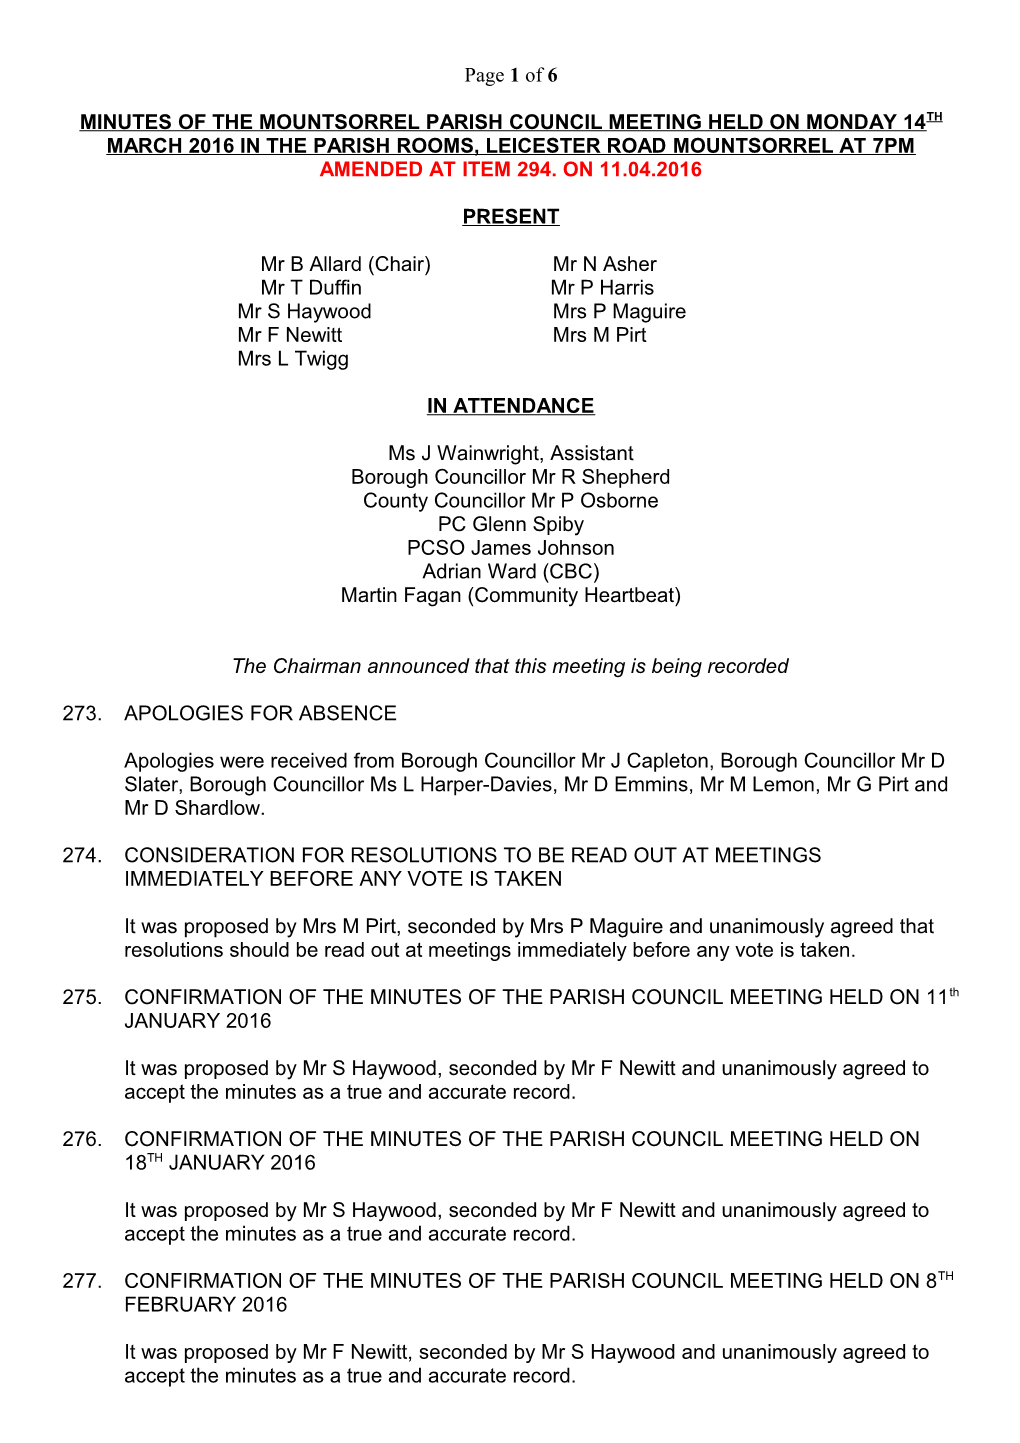 MINUTES of the MOUNTSORREL PARISH COUNCIL MEETING HELD on MONDAY 11Th MAY 2009 in the PARISH